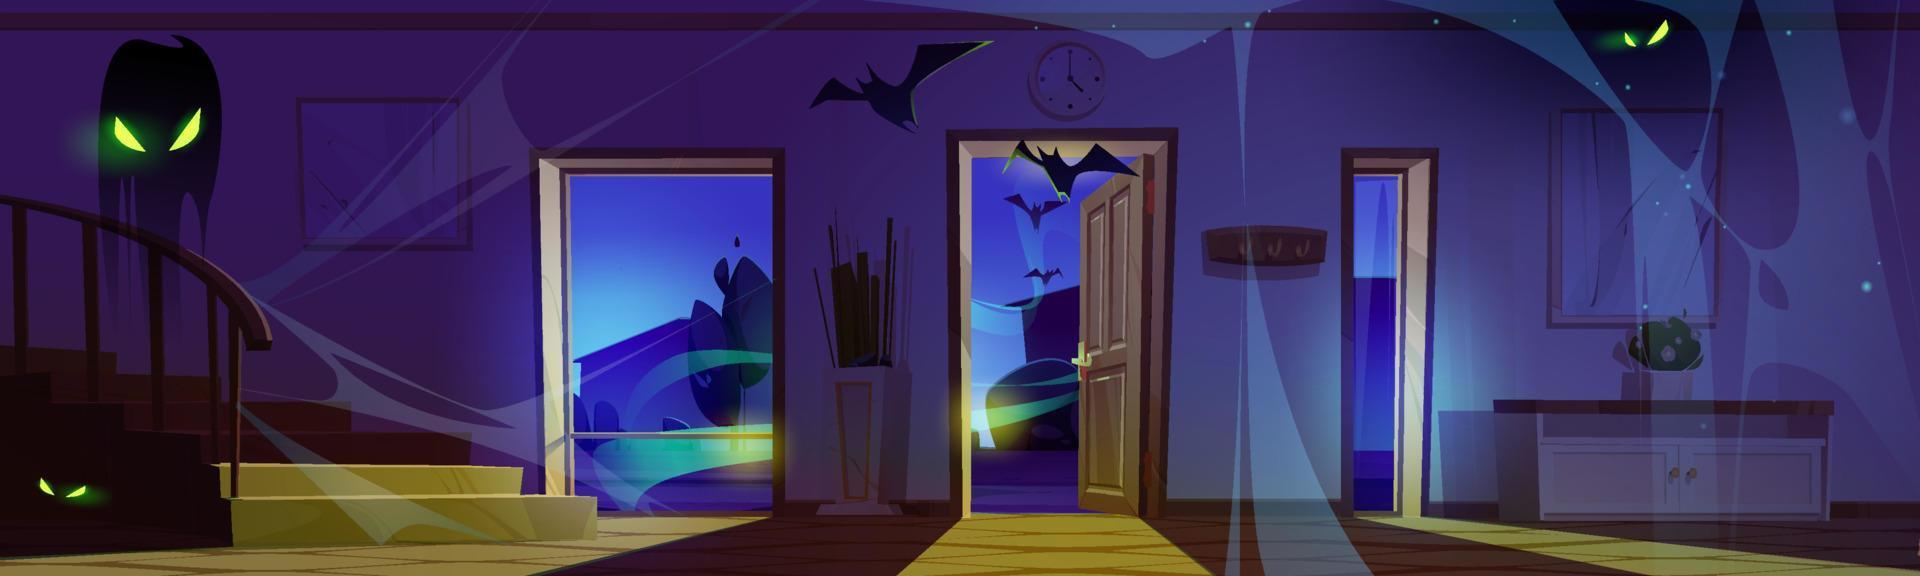 Scary house with ghosts, bats and spiderweb vector